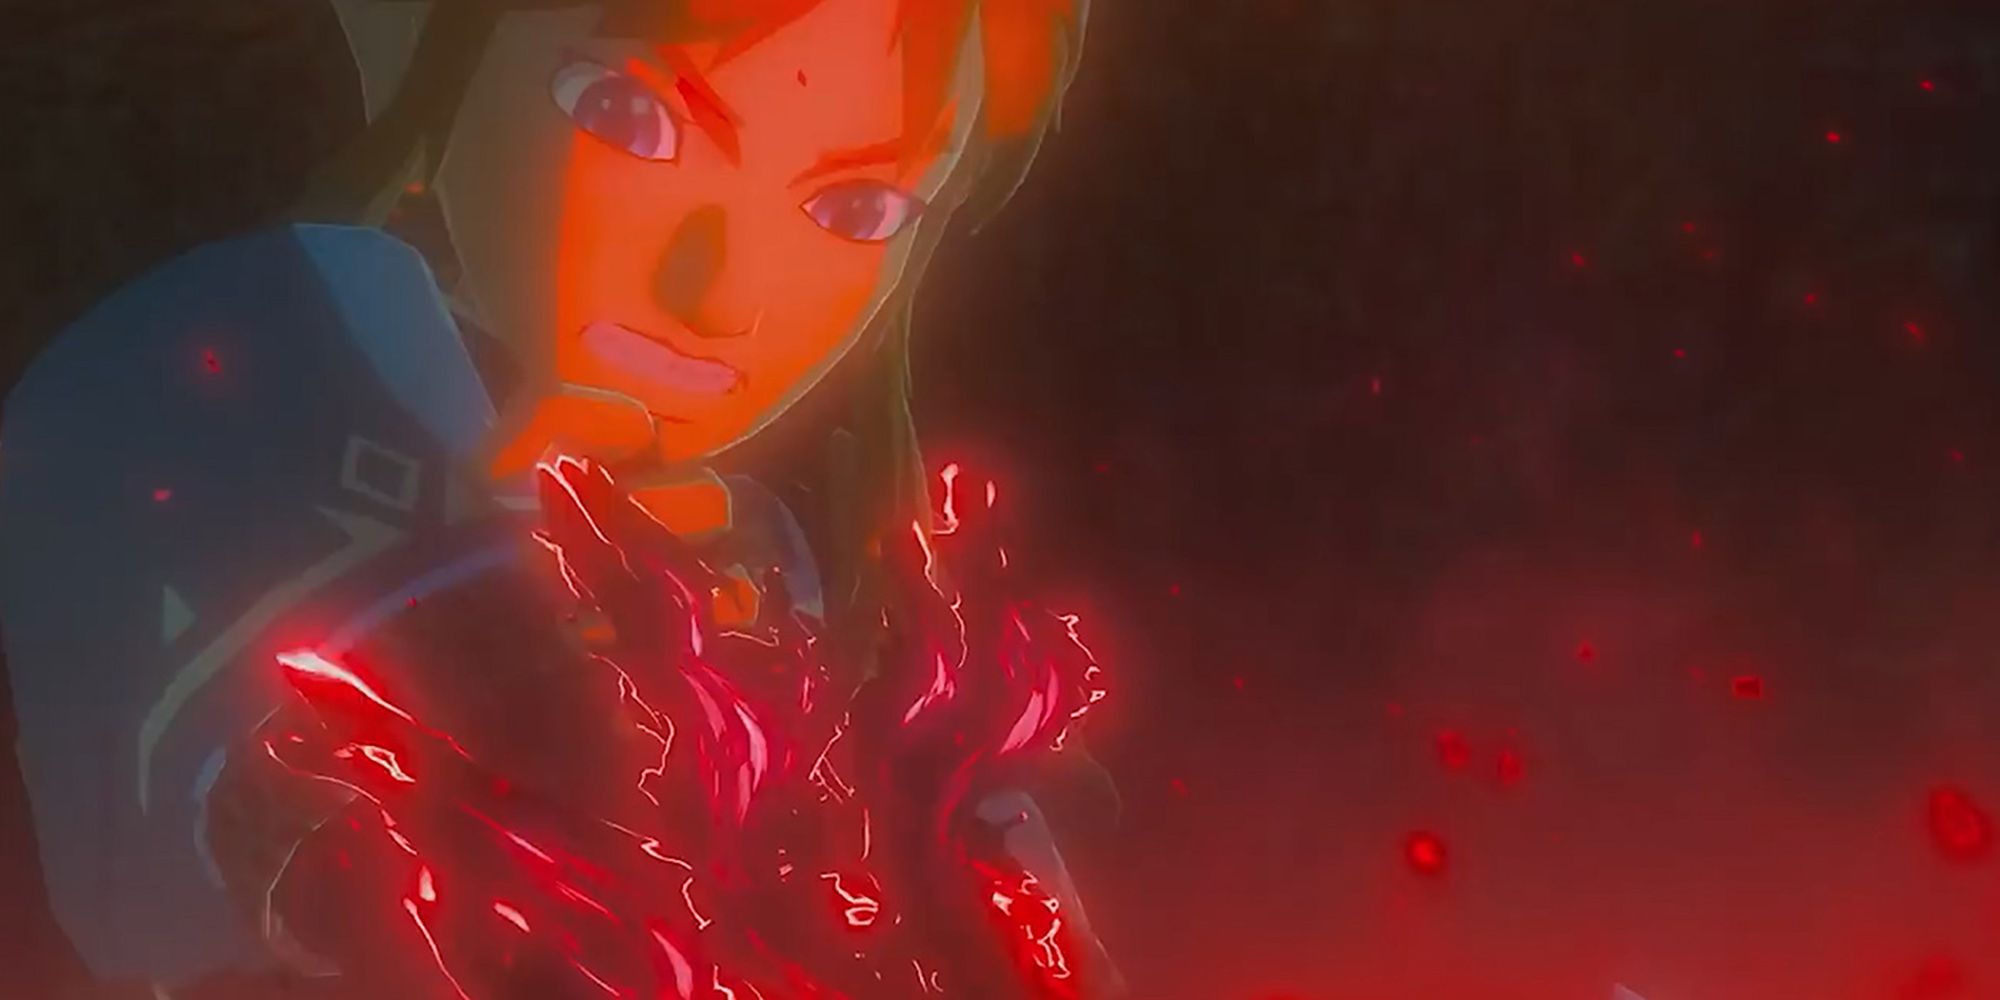 Legend-Of-Zelda-Breath-Of-The-Wild-2-Second-Trailer---The-Start-Of-The-Trailer-Where-Links-Arm-Seems-To-Be-Getting-Infected-With-Malice-1